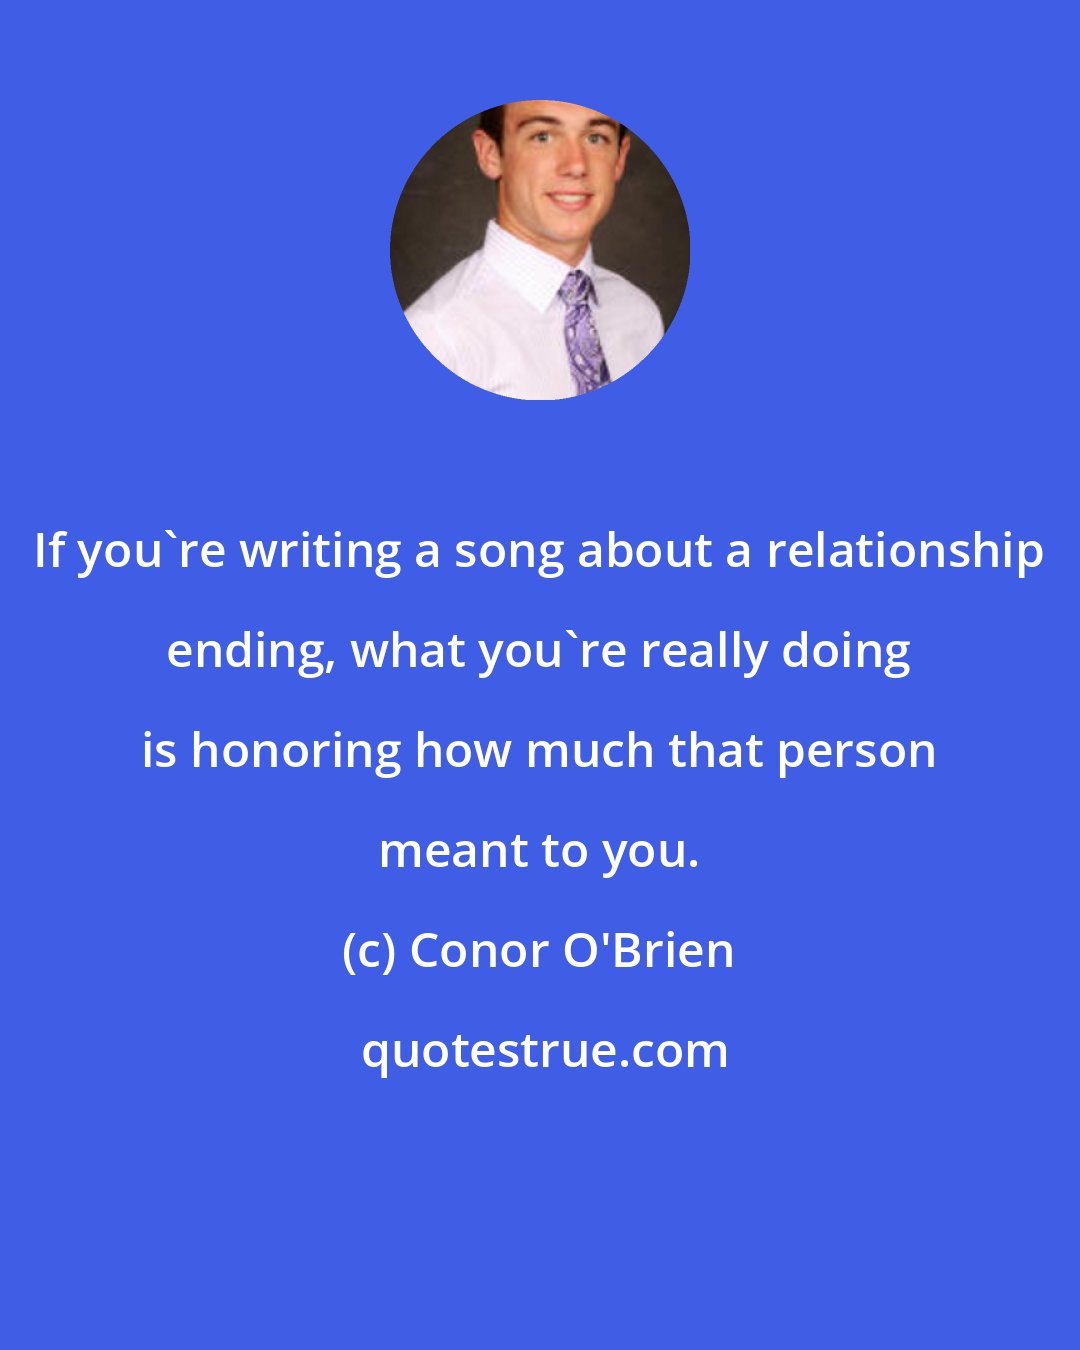 Conor O'Brien: If you're writing a song about a relationship ending, what you're really doing is honoring how much that person meant to you.